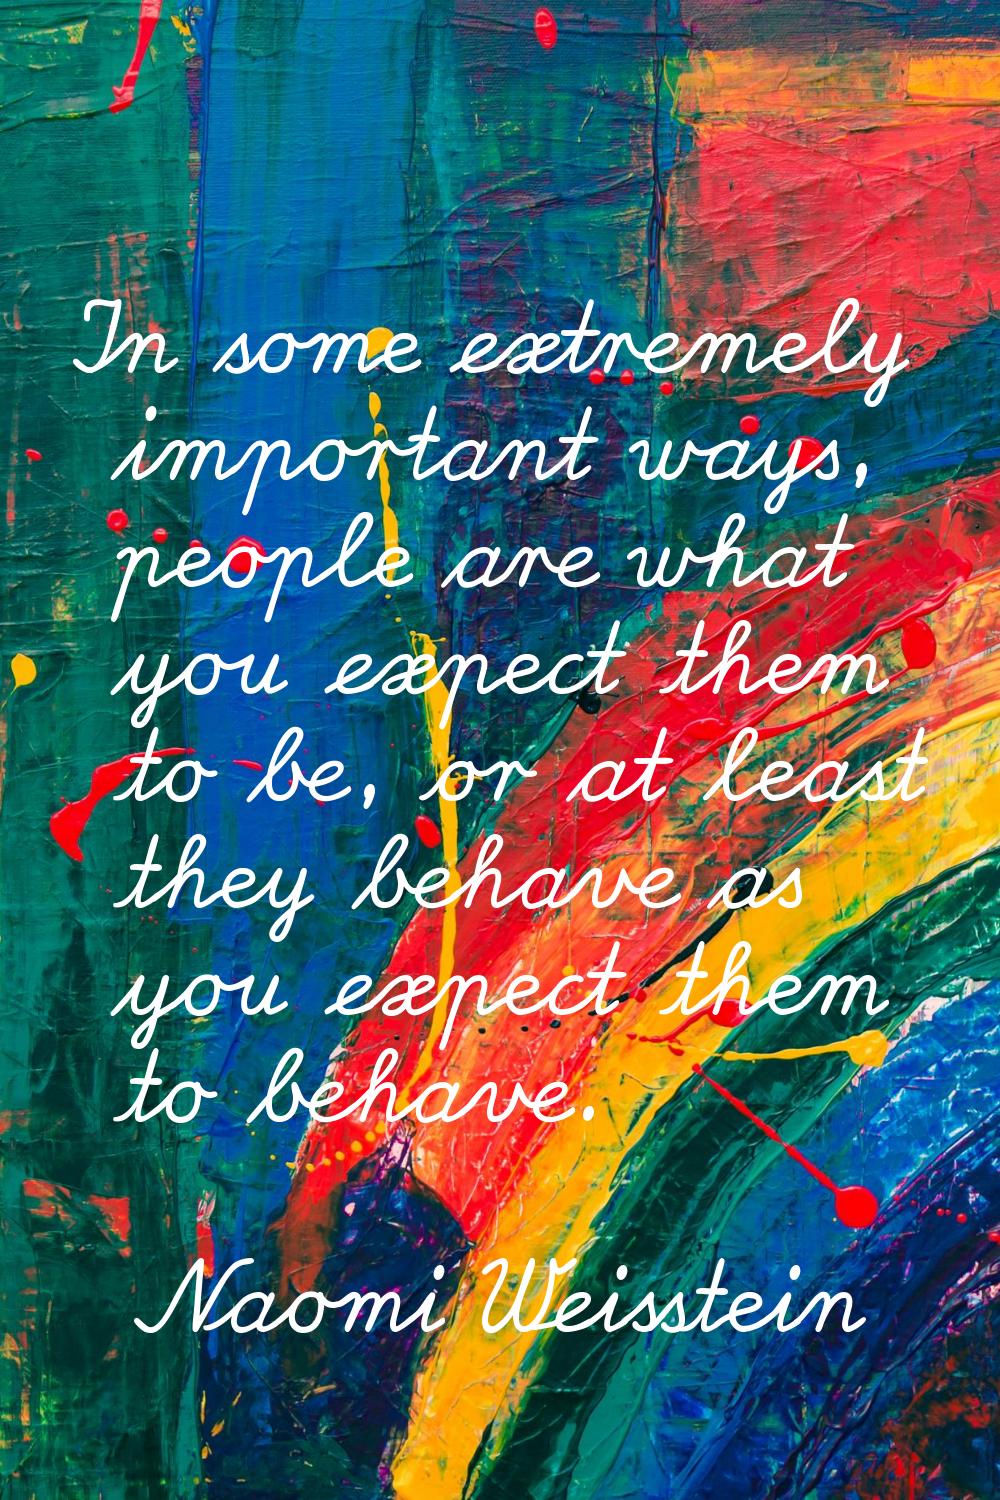 In some extremely important ways, people are what you expect them to be, or at least they behave as